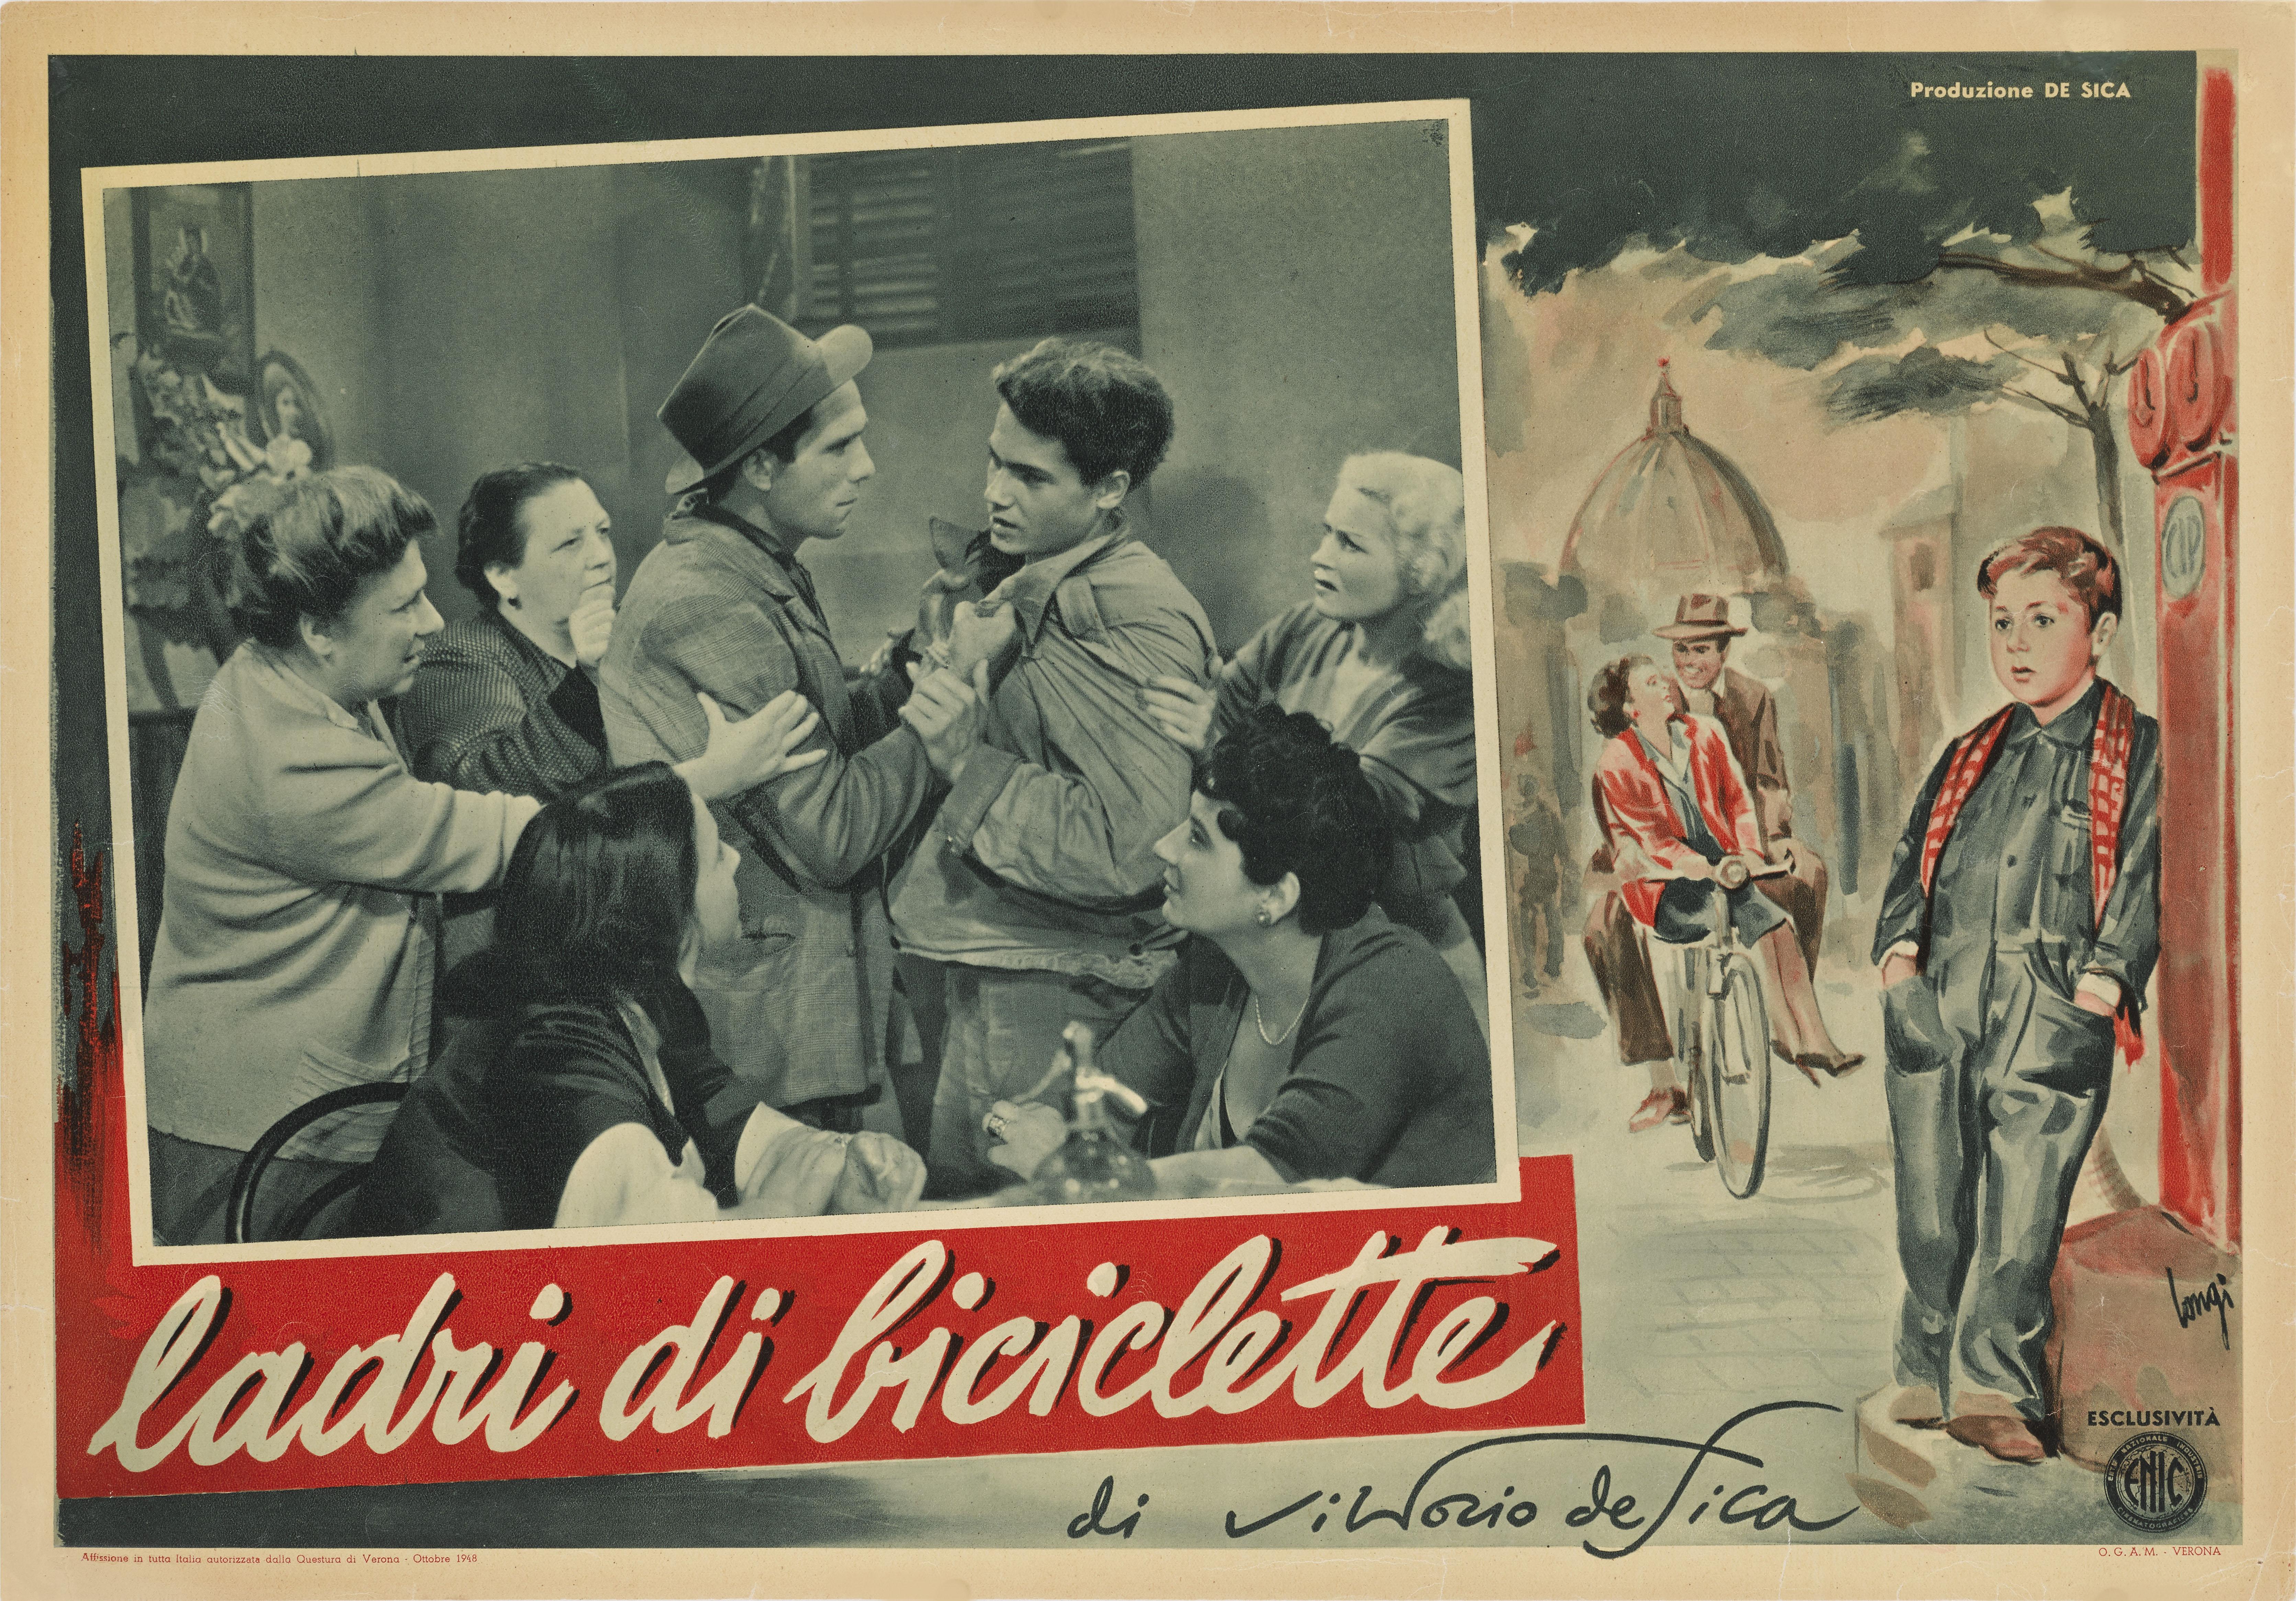 Original Italian film poster for 1948 landmark Neo-Realism film
Ladri di Biciclette / Bicycle Thieves. This film was directed by Vittorio De Sica and starred Lamberto  Maggiorani, Enzo Staiola and  Lianella Carell.
This poster is conservation paper